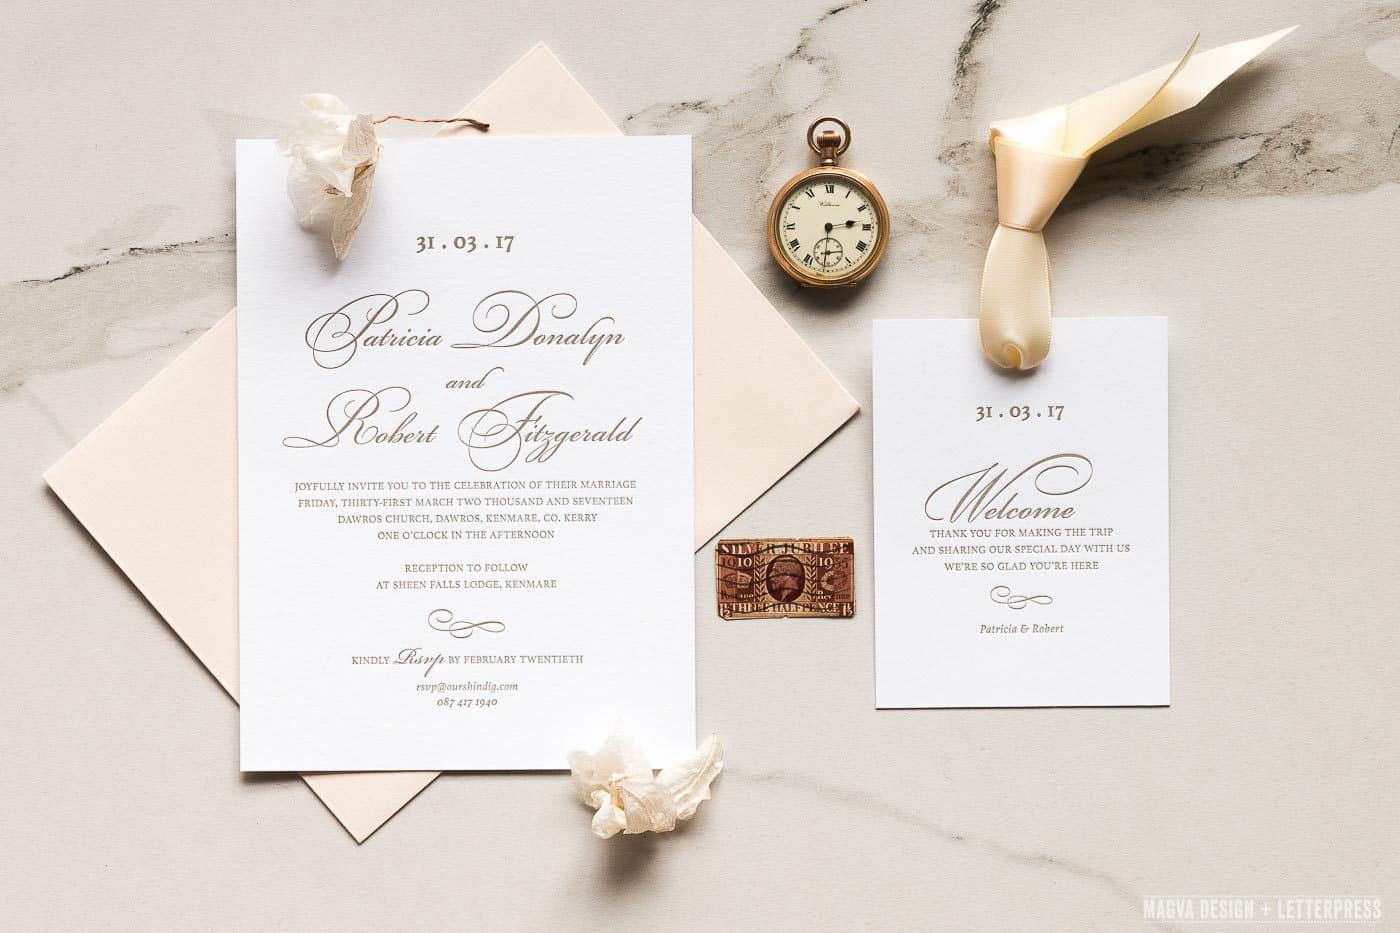 Wedding Invitation and Welcome note resting on a marble tile